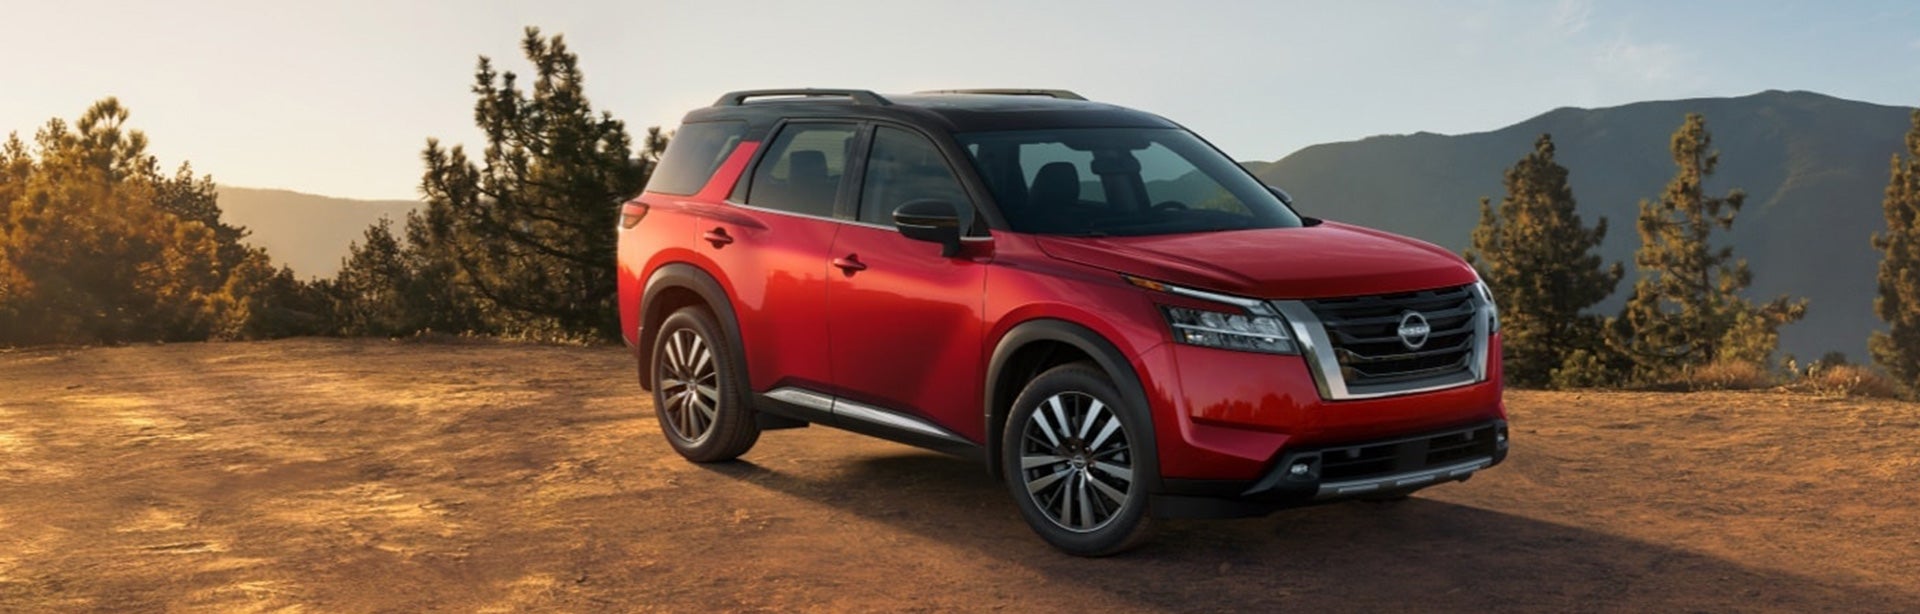 Coming Soon: The 2022 Nissan Pathfinder